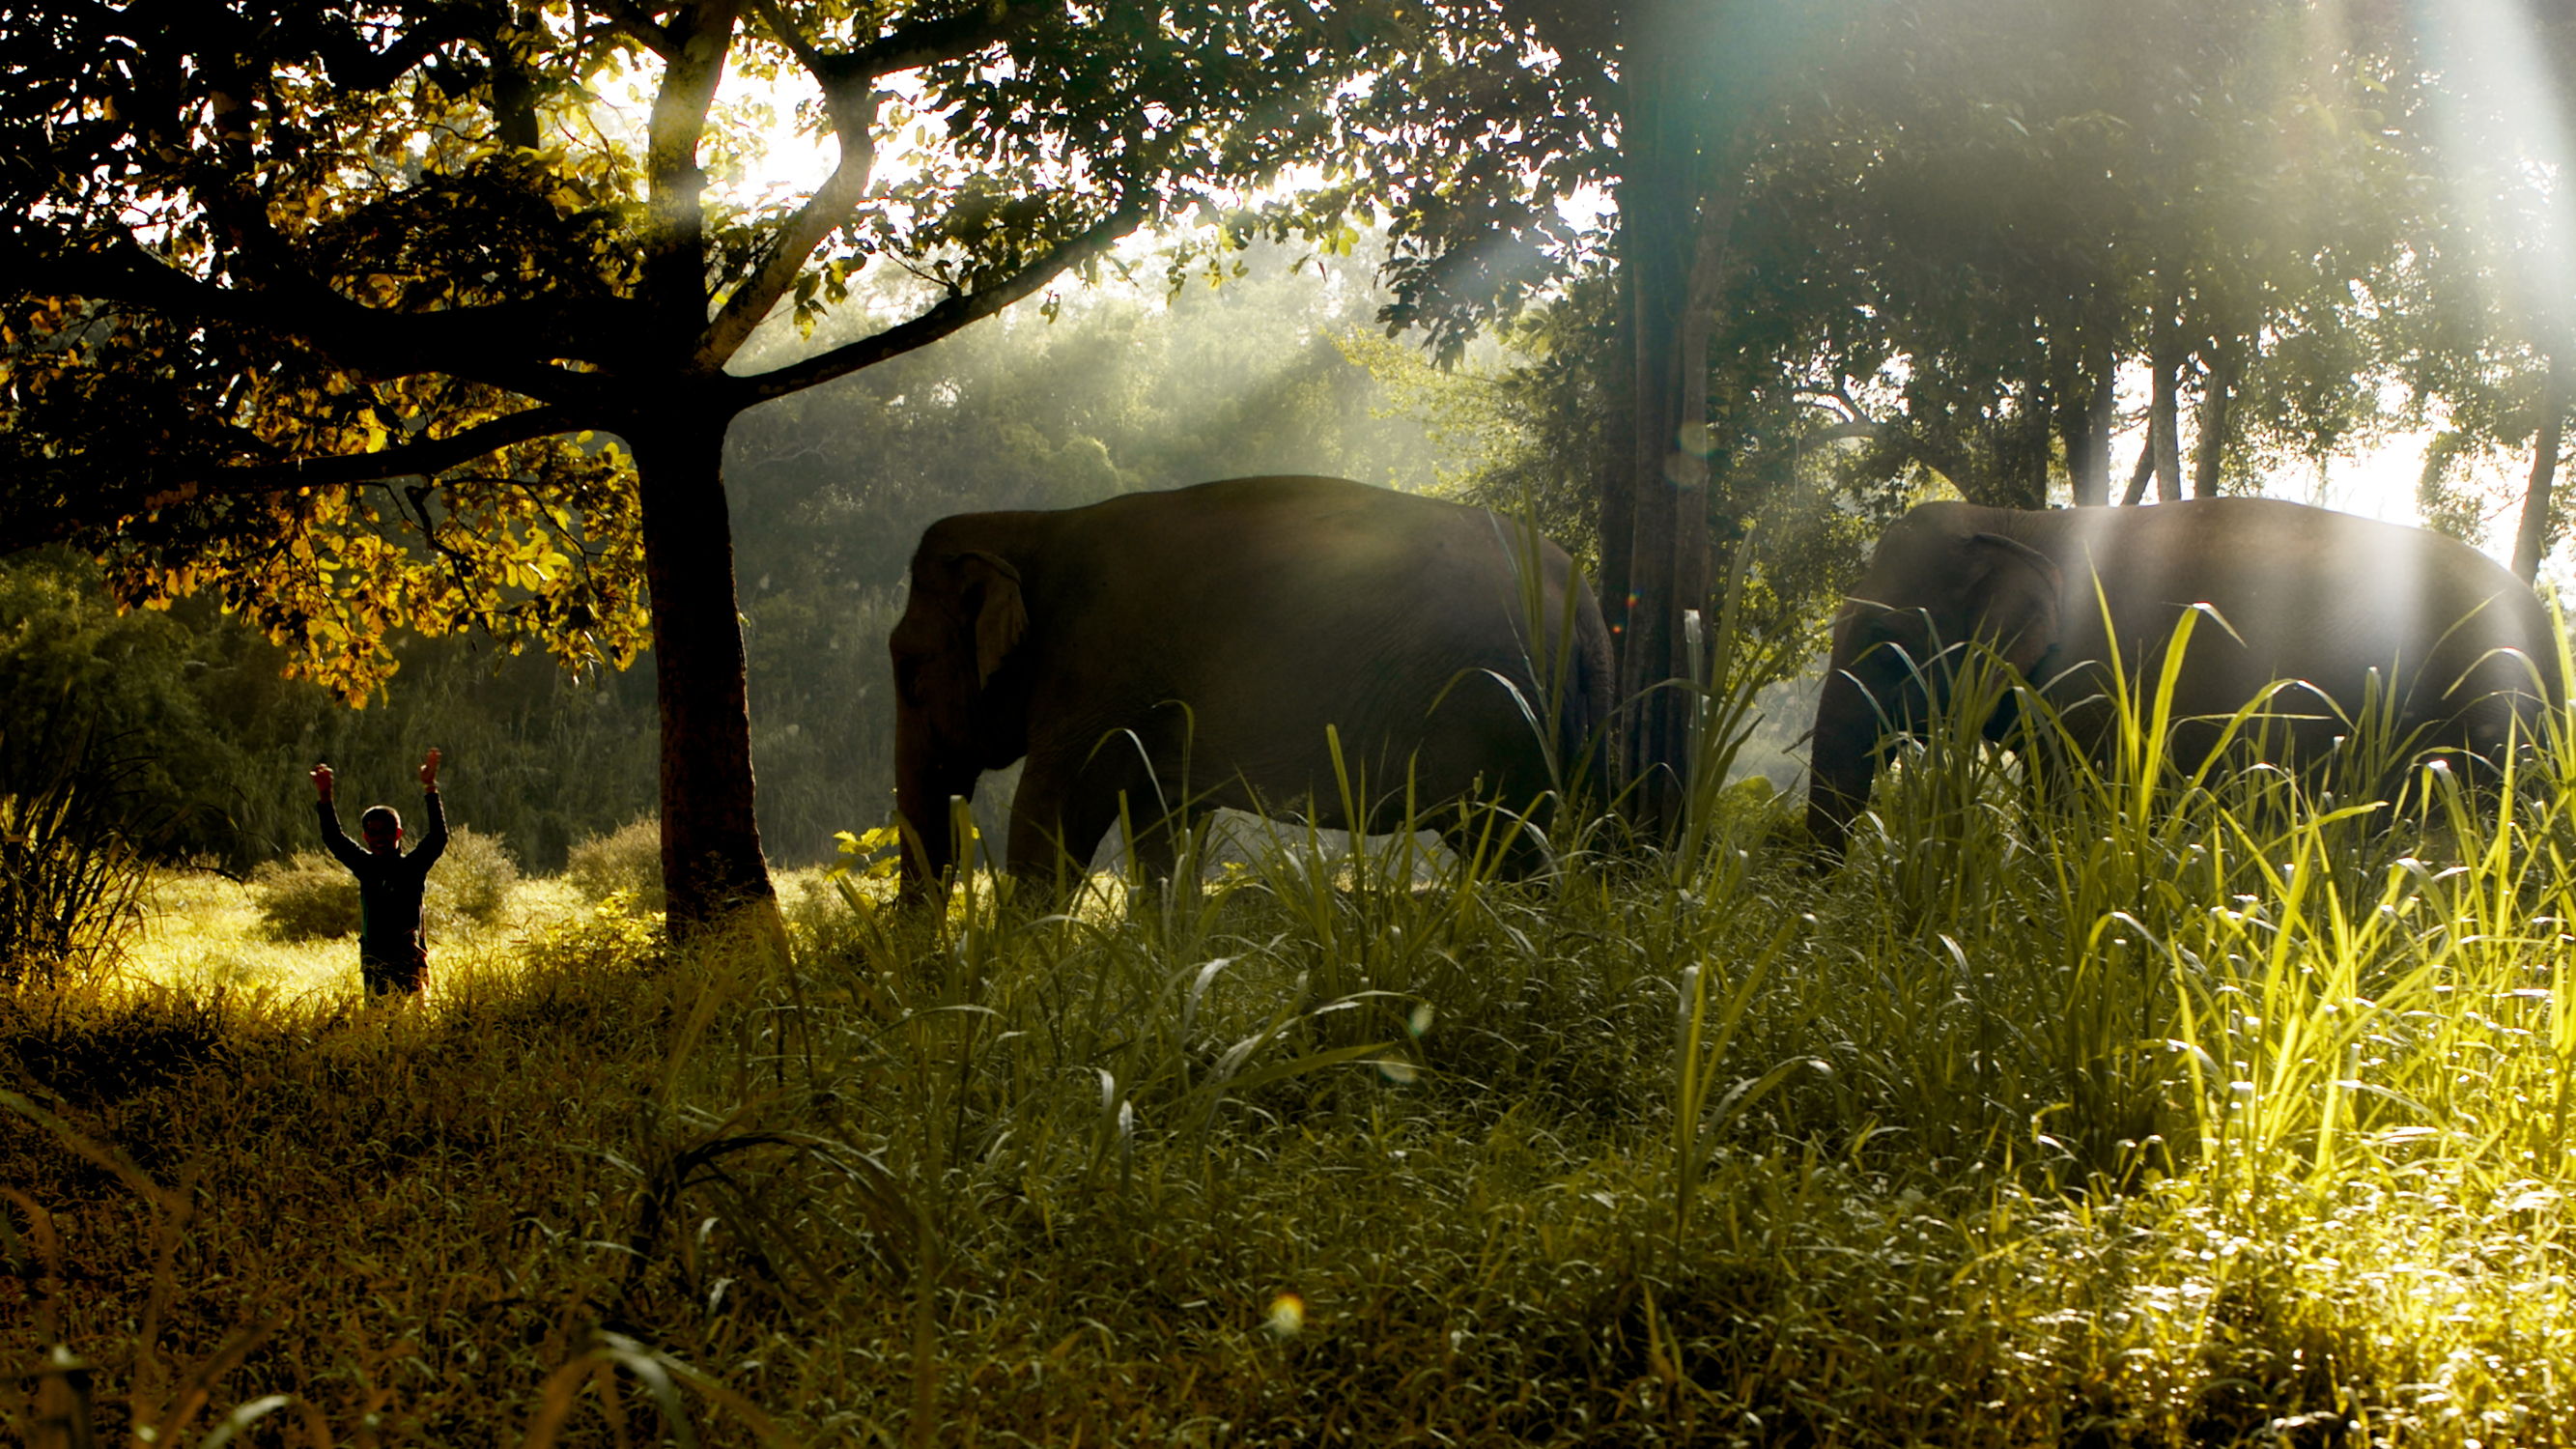 Time for Thailand - Mahout and Elephants